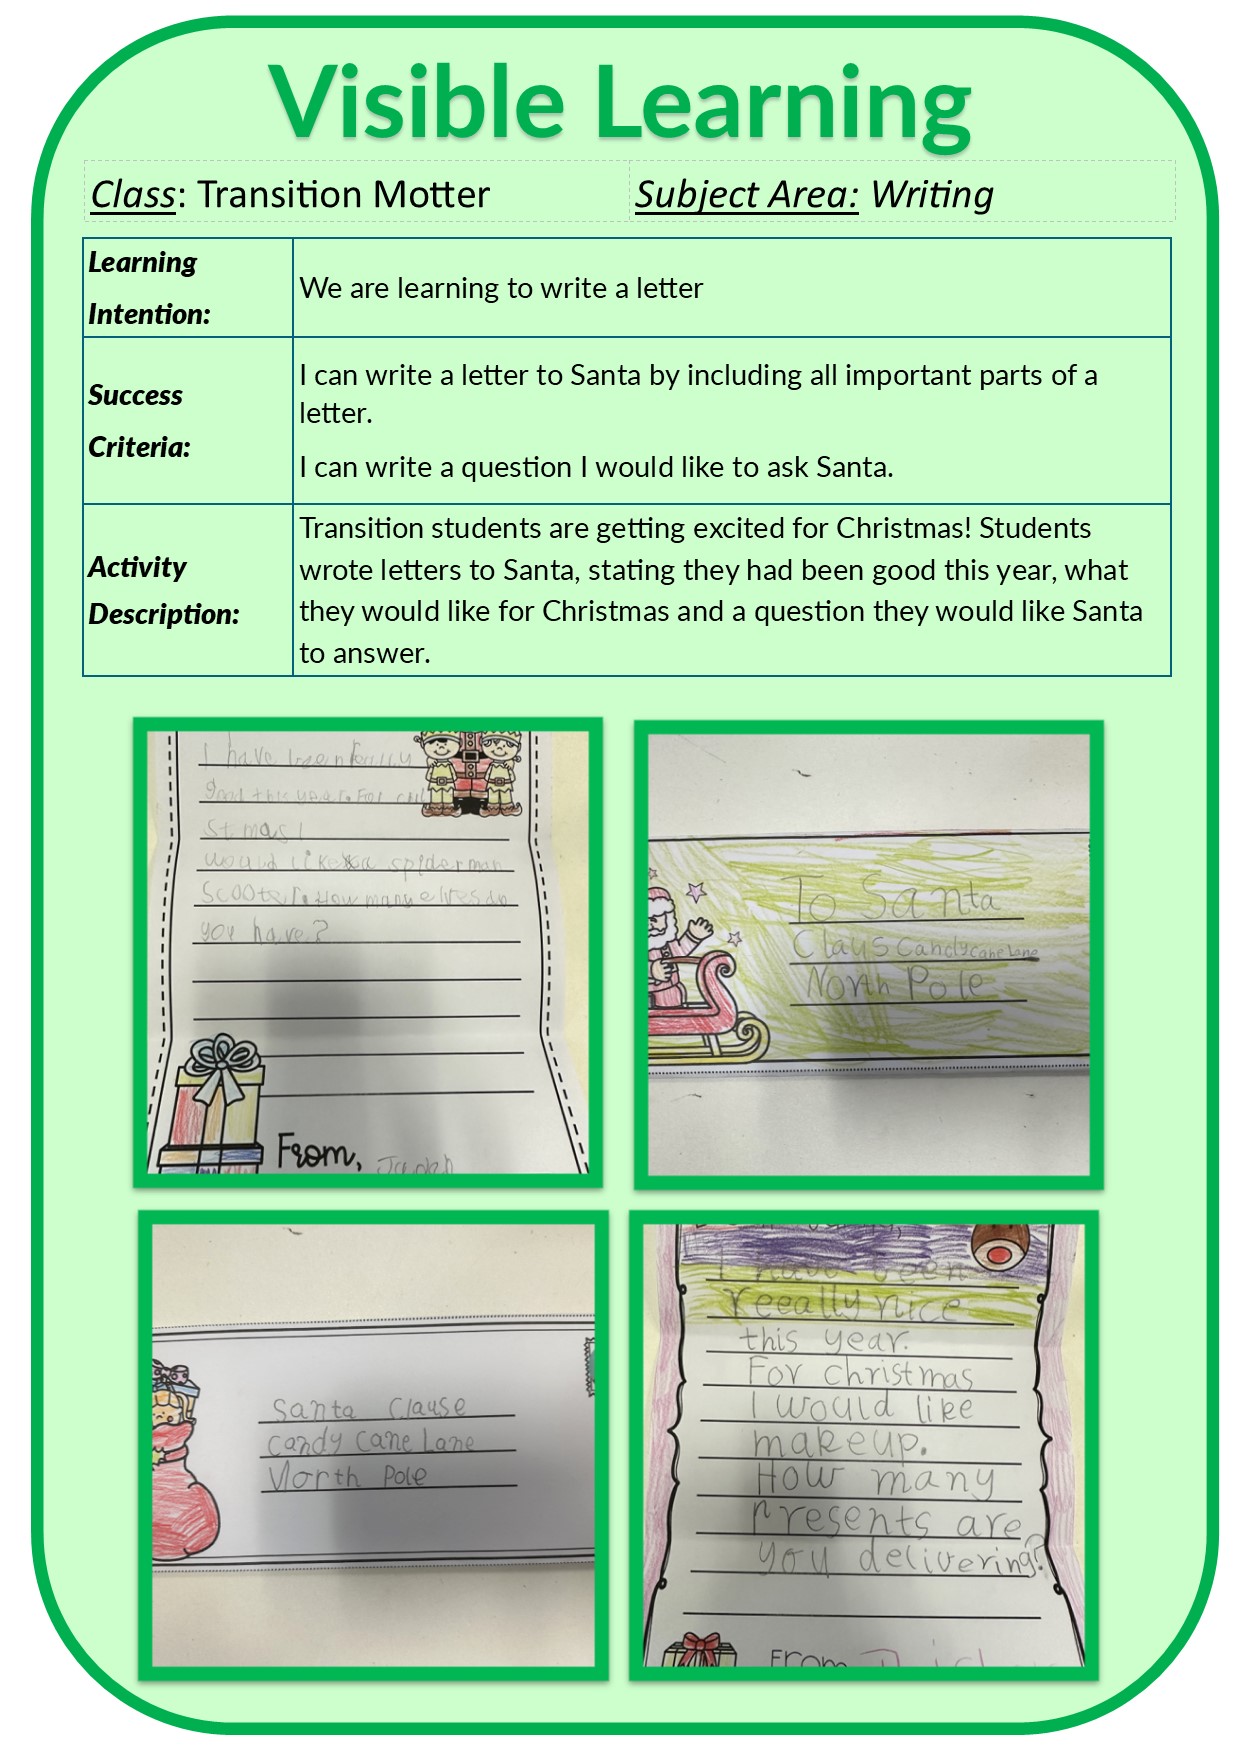 Visible Learning/TrM Writing T4 Week5.jpg